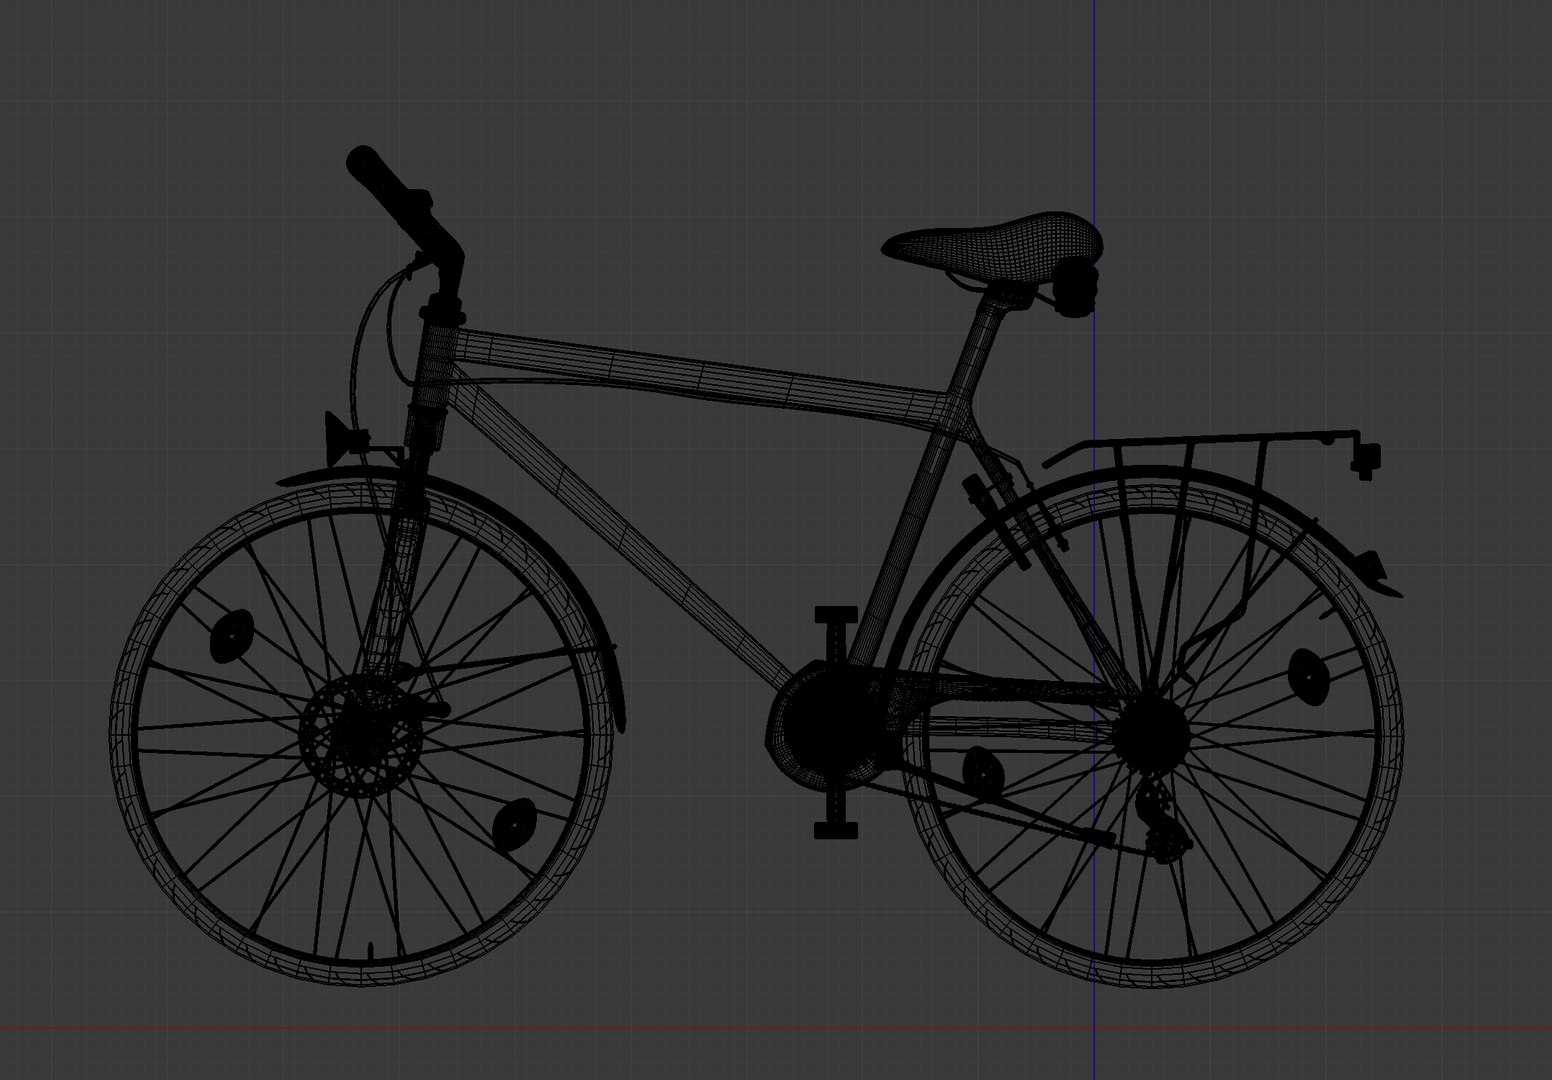 Touring bicycle cycle 3D model - TurboSquid 1404688